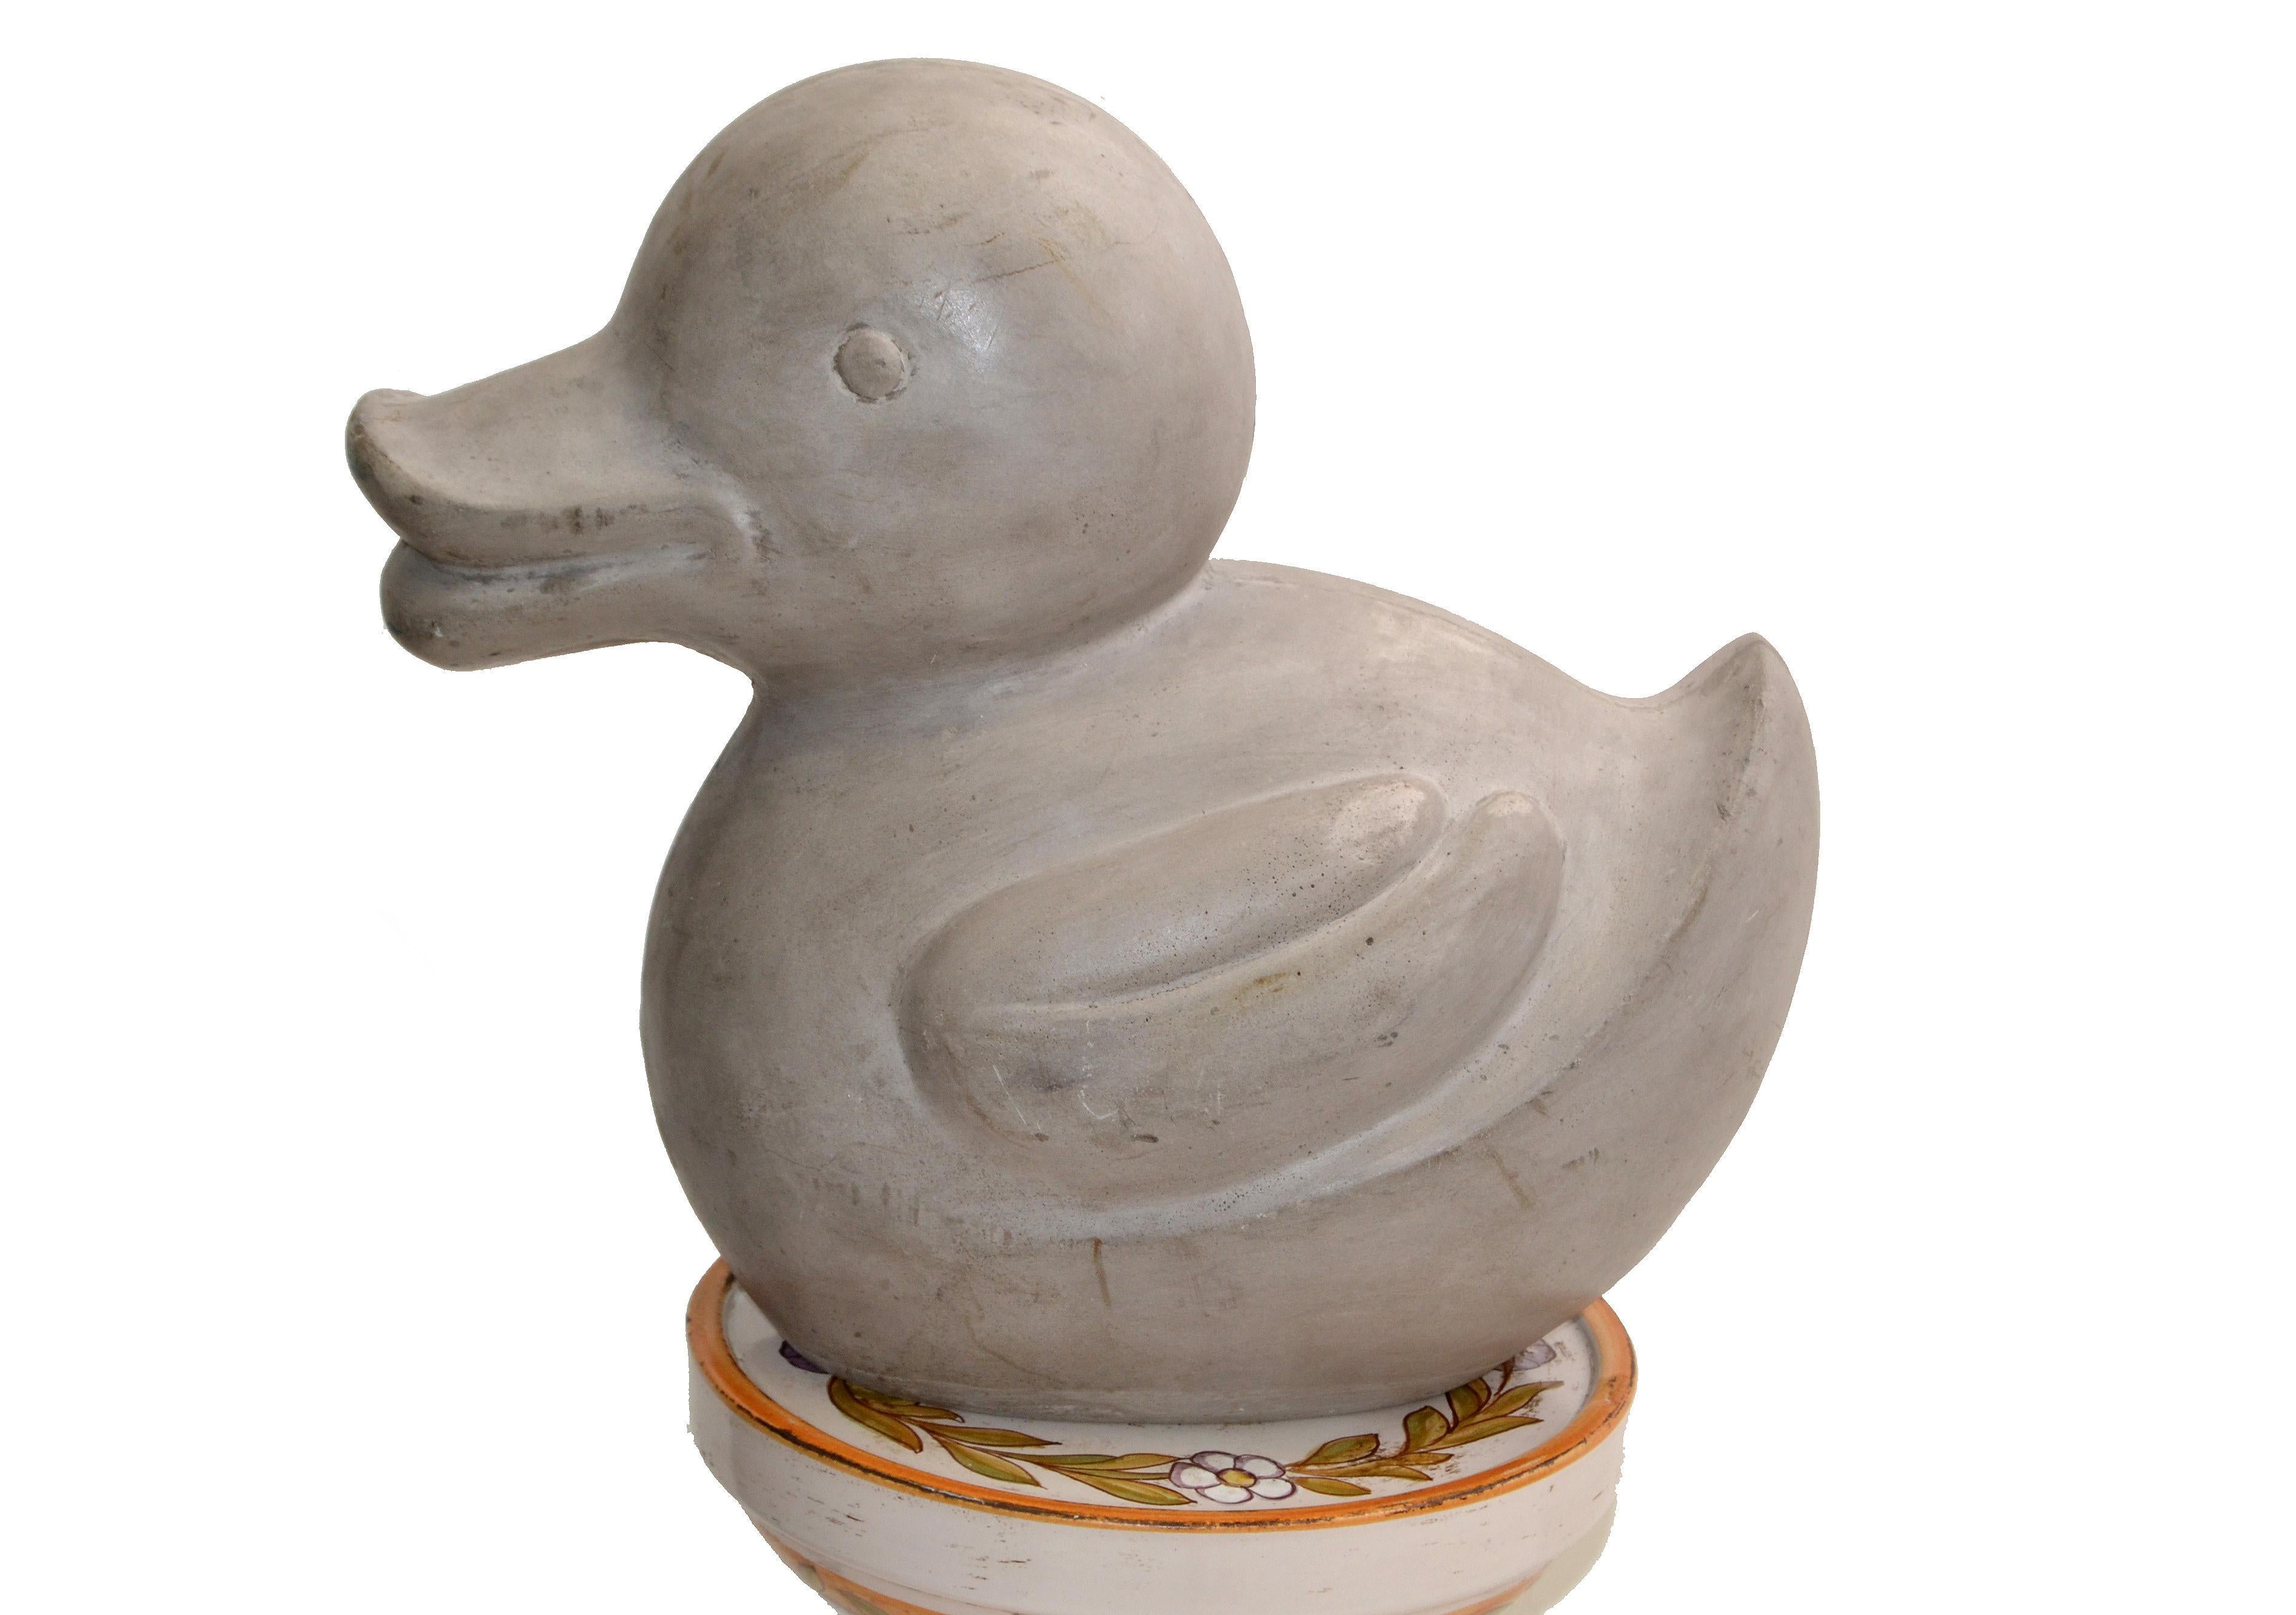 Arts and Crafts Distressed Look Decorative Handcrafted Cement Mold Duck, Animal Sculpture